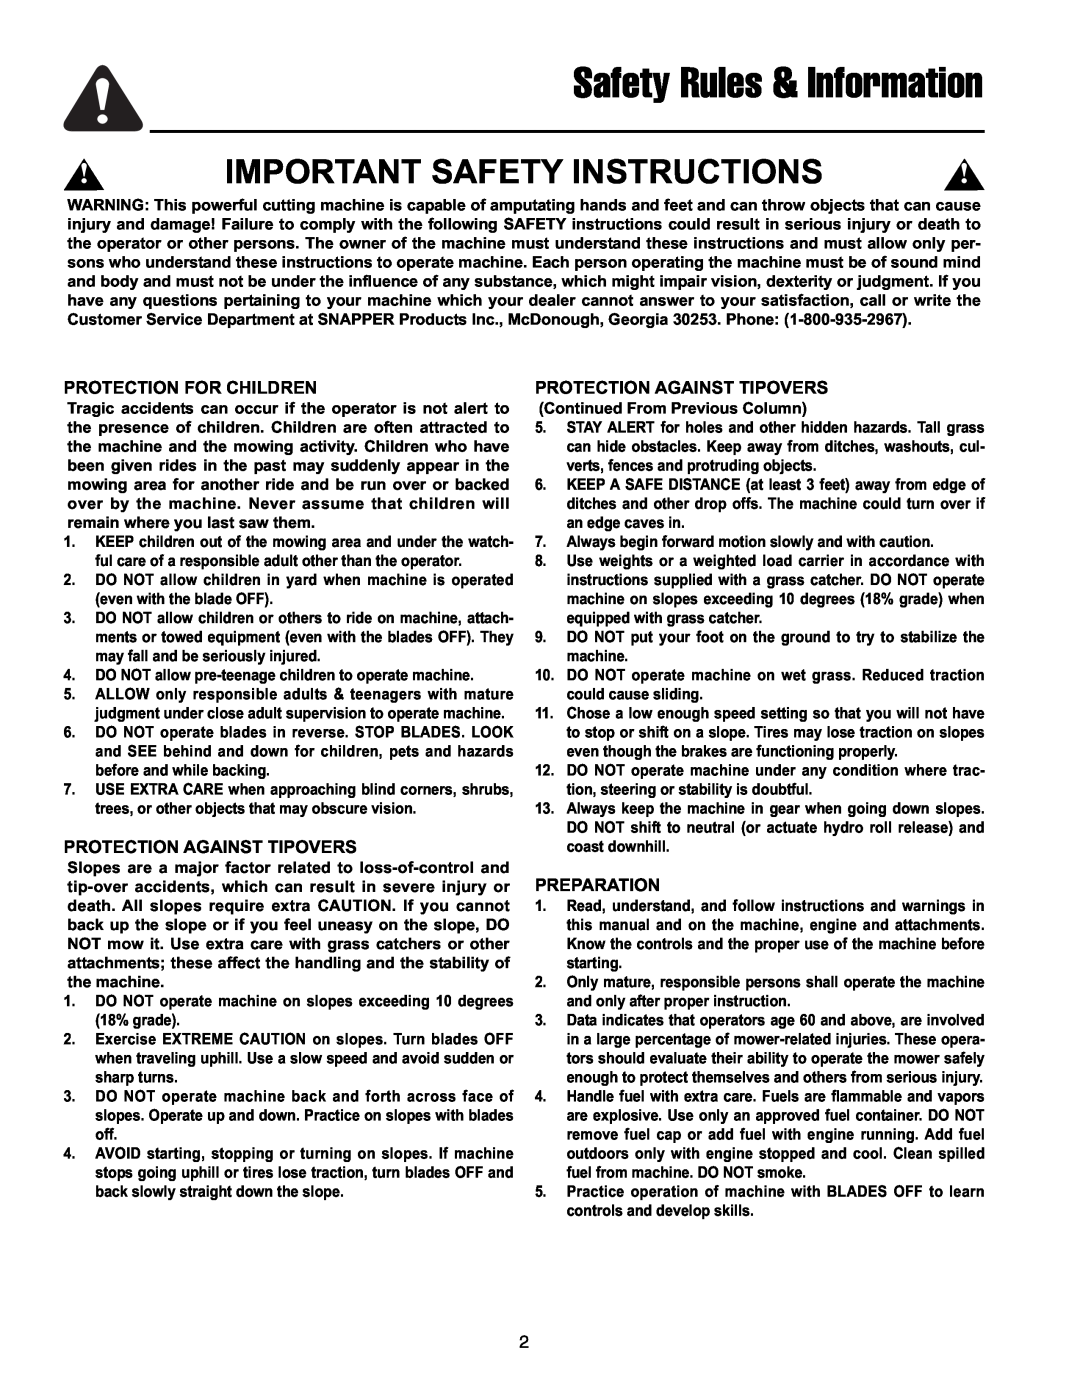 Simplicity 7800071 Safety Rules & Information, Important Safety Instructions, Protection For Children, Preparation 